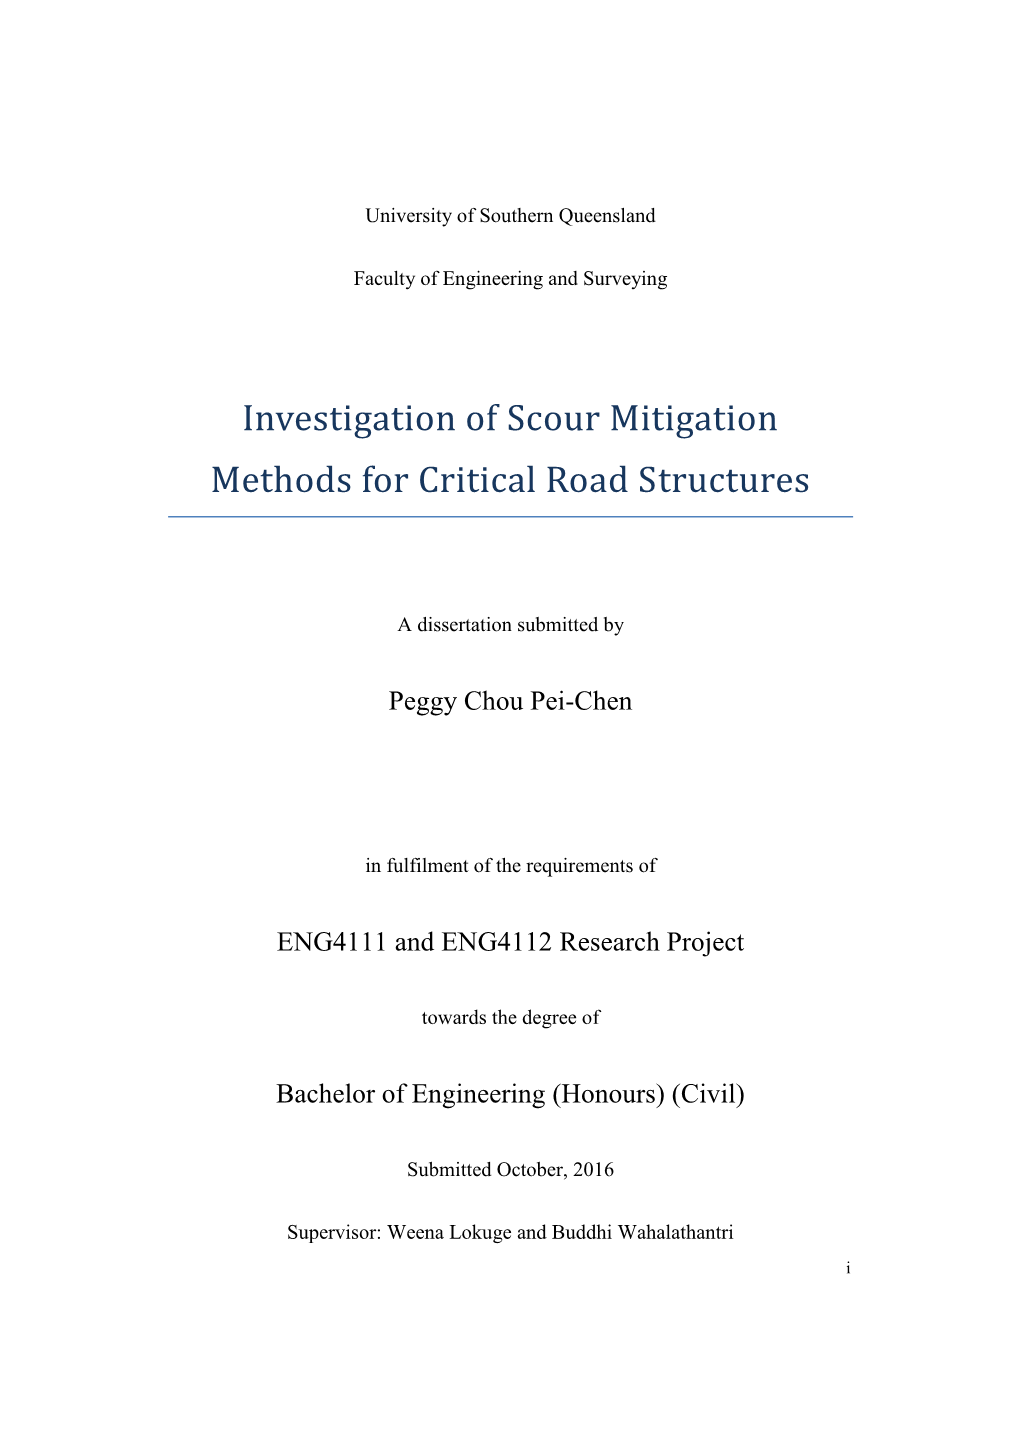 Investigation of Scour Mitigation Methods for Critical Road Structures